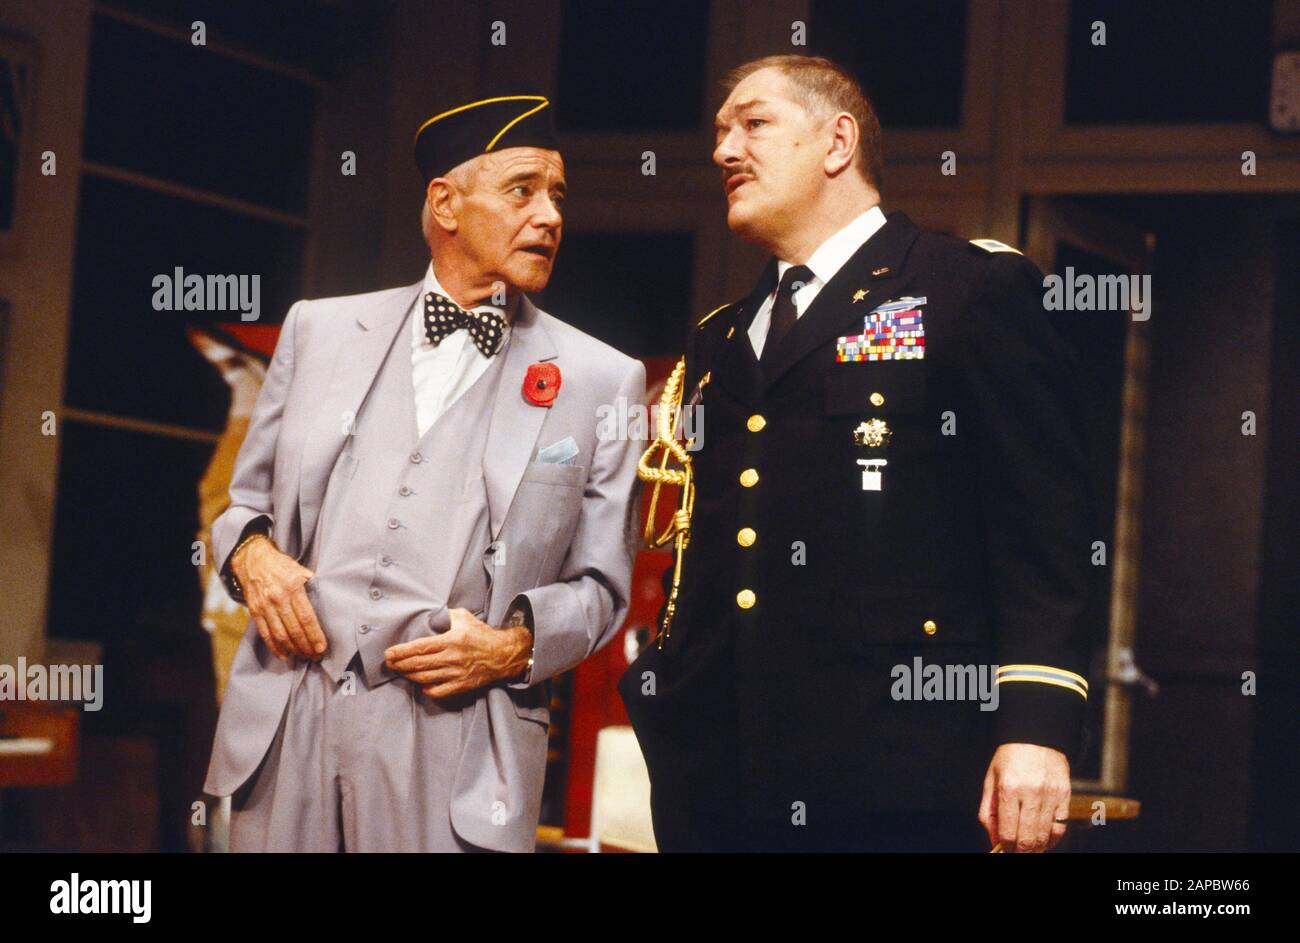 Jack Lemmon (John MacCormick Butts) with Michael Gambon (Walter Kercelik) in VETERANS DAY by Donald Freed directed by Kevin Billington at the Theatre Royal Haymarket, London in 1989. Michael John Gambon, born in Cabra, Dublin in 1940, moved to London at the age of 6 and became a British citizen. Knighted in 1998. Multi-award-winner, including 3 Oliviers and 4 BAFTAs. Stock Photo